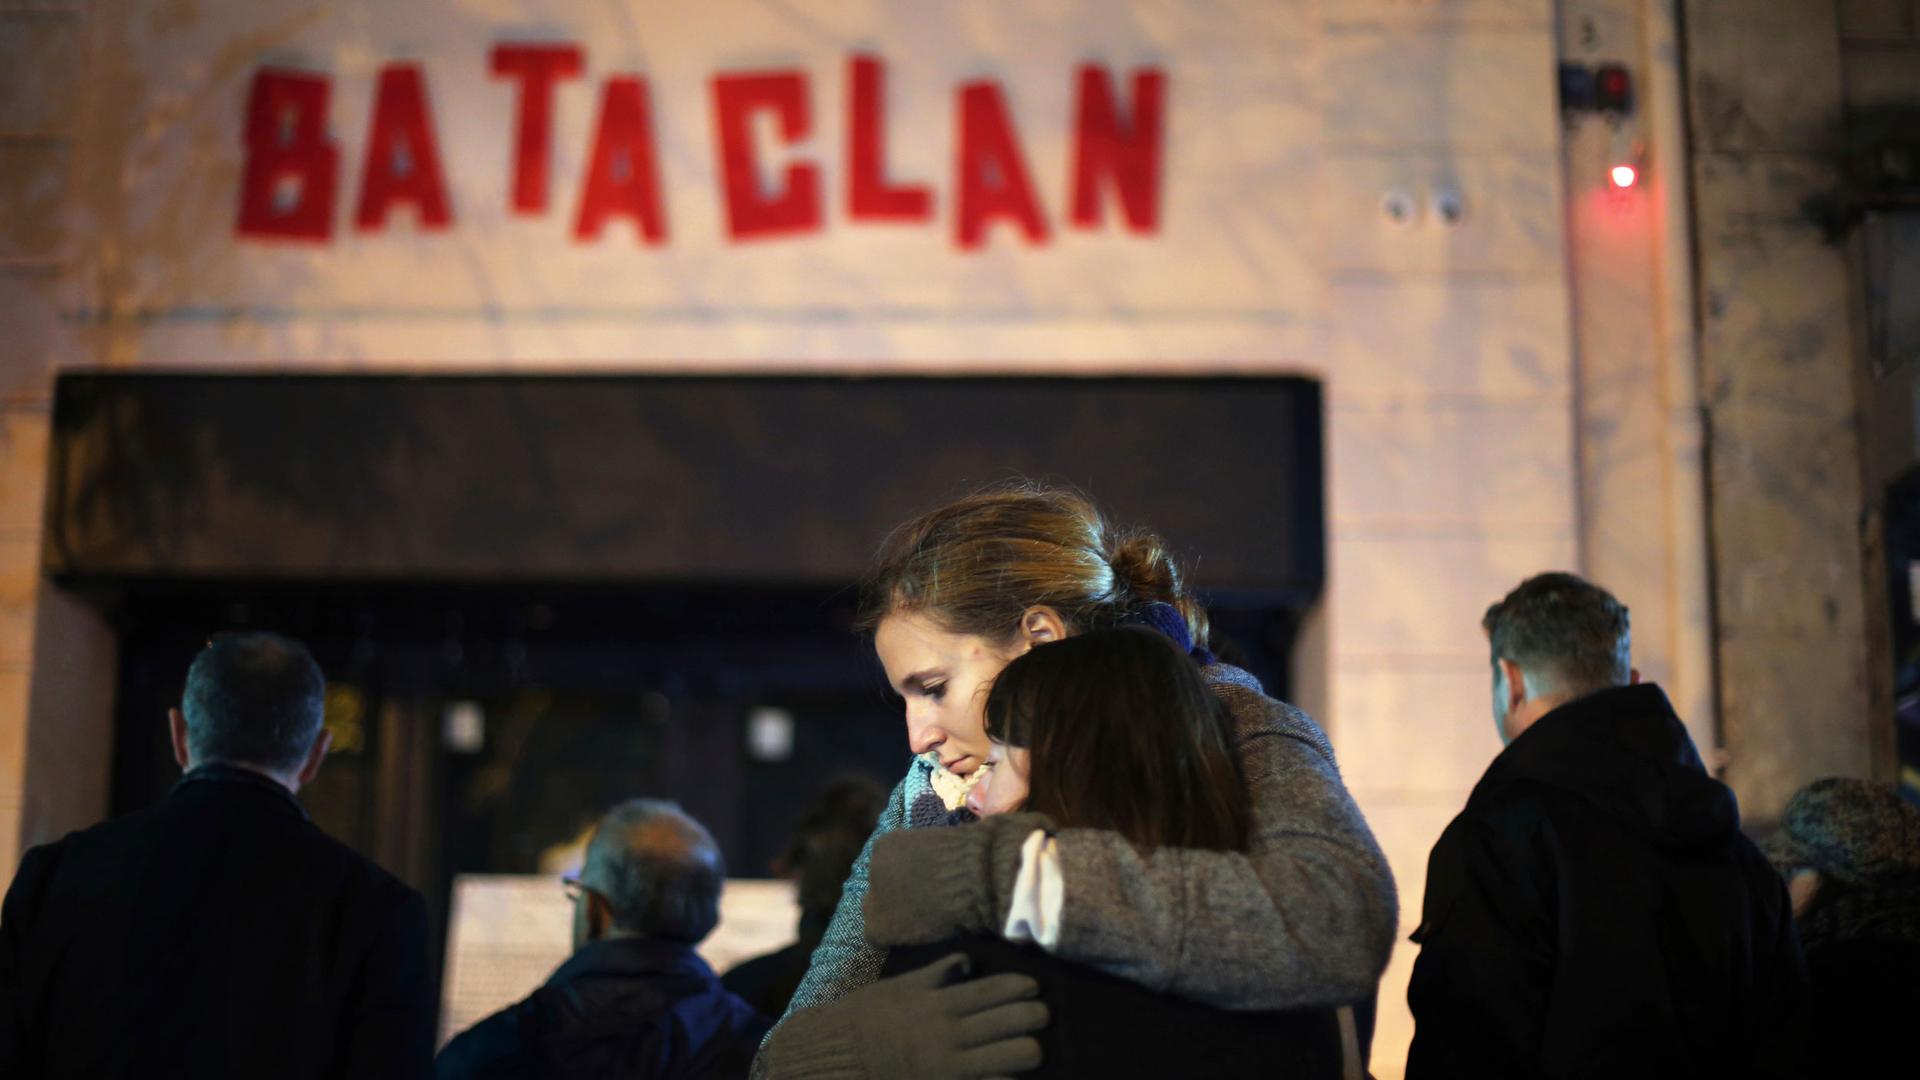 Two women are shown hugging each other with the entrance and red-lettered sign of the Bataclan concert hall in the background.